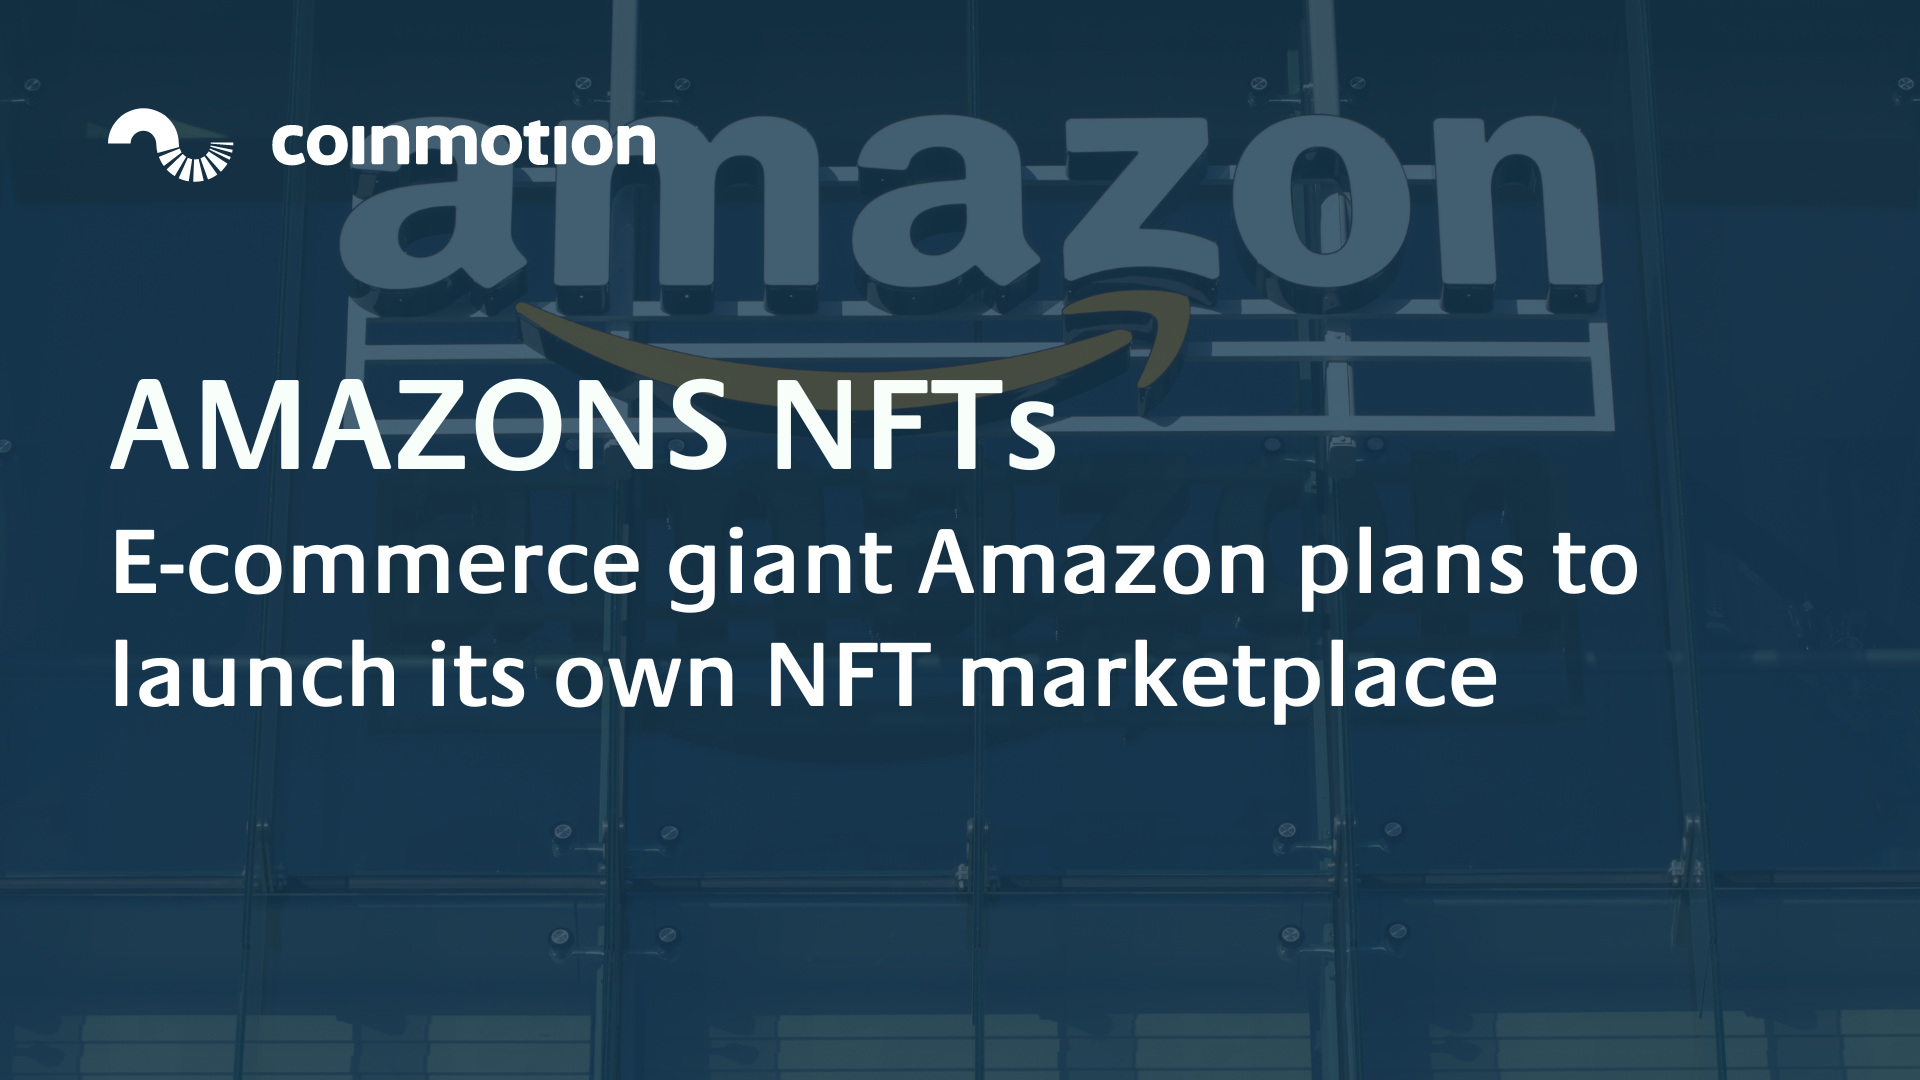 Amazon rumored to be launching its own NFT marketplace